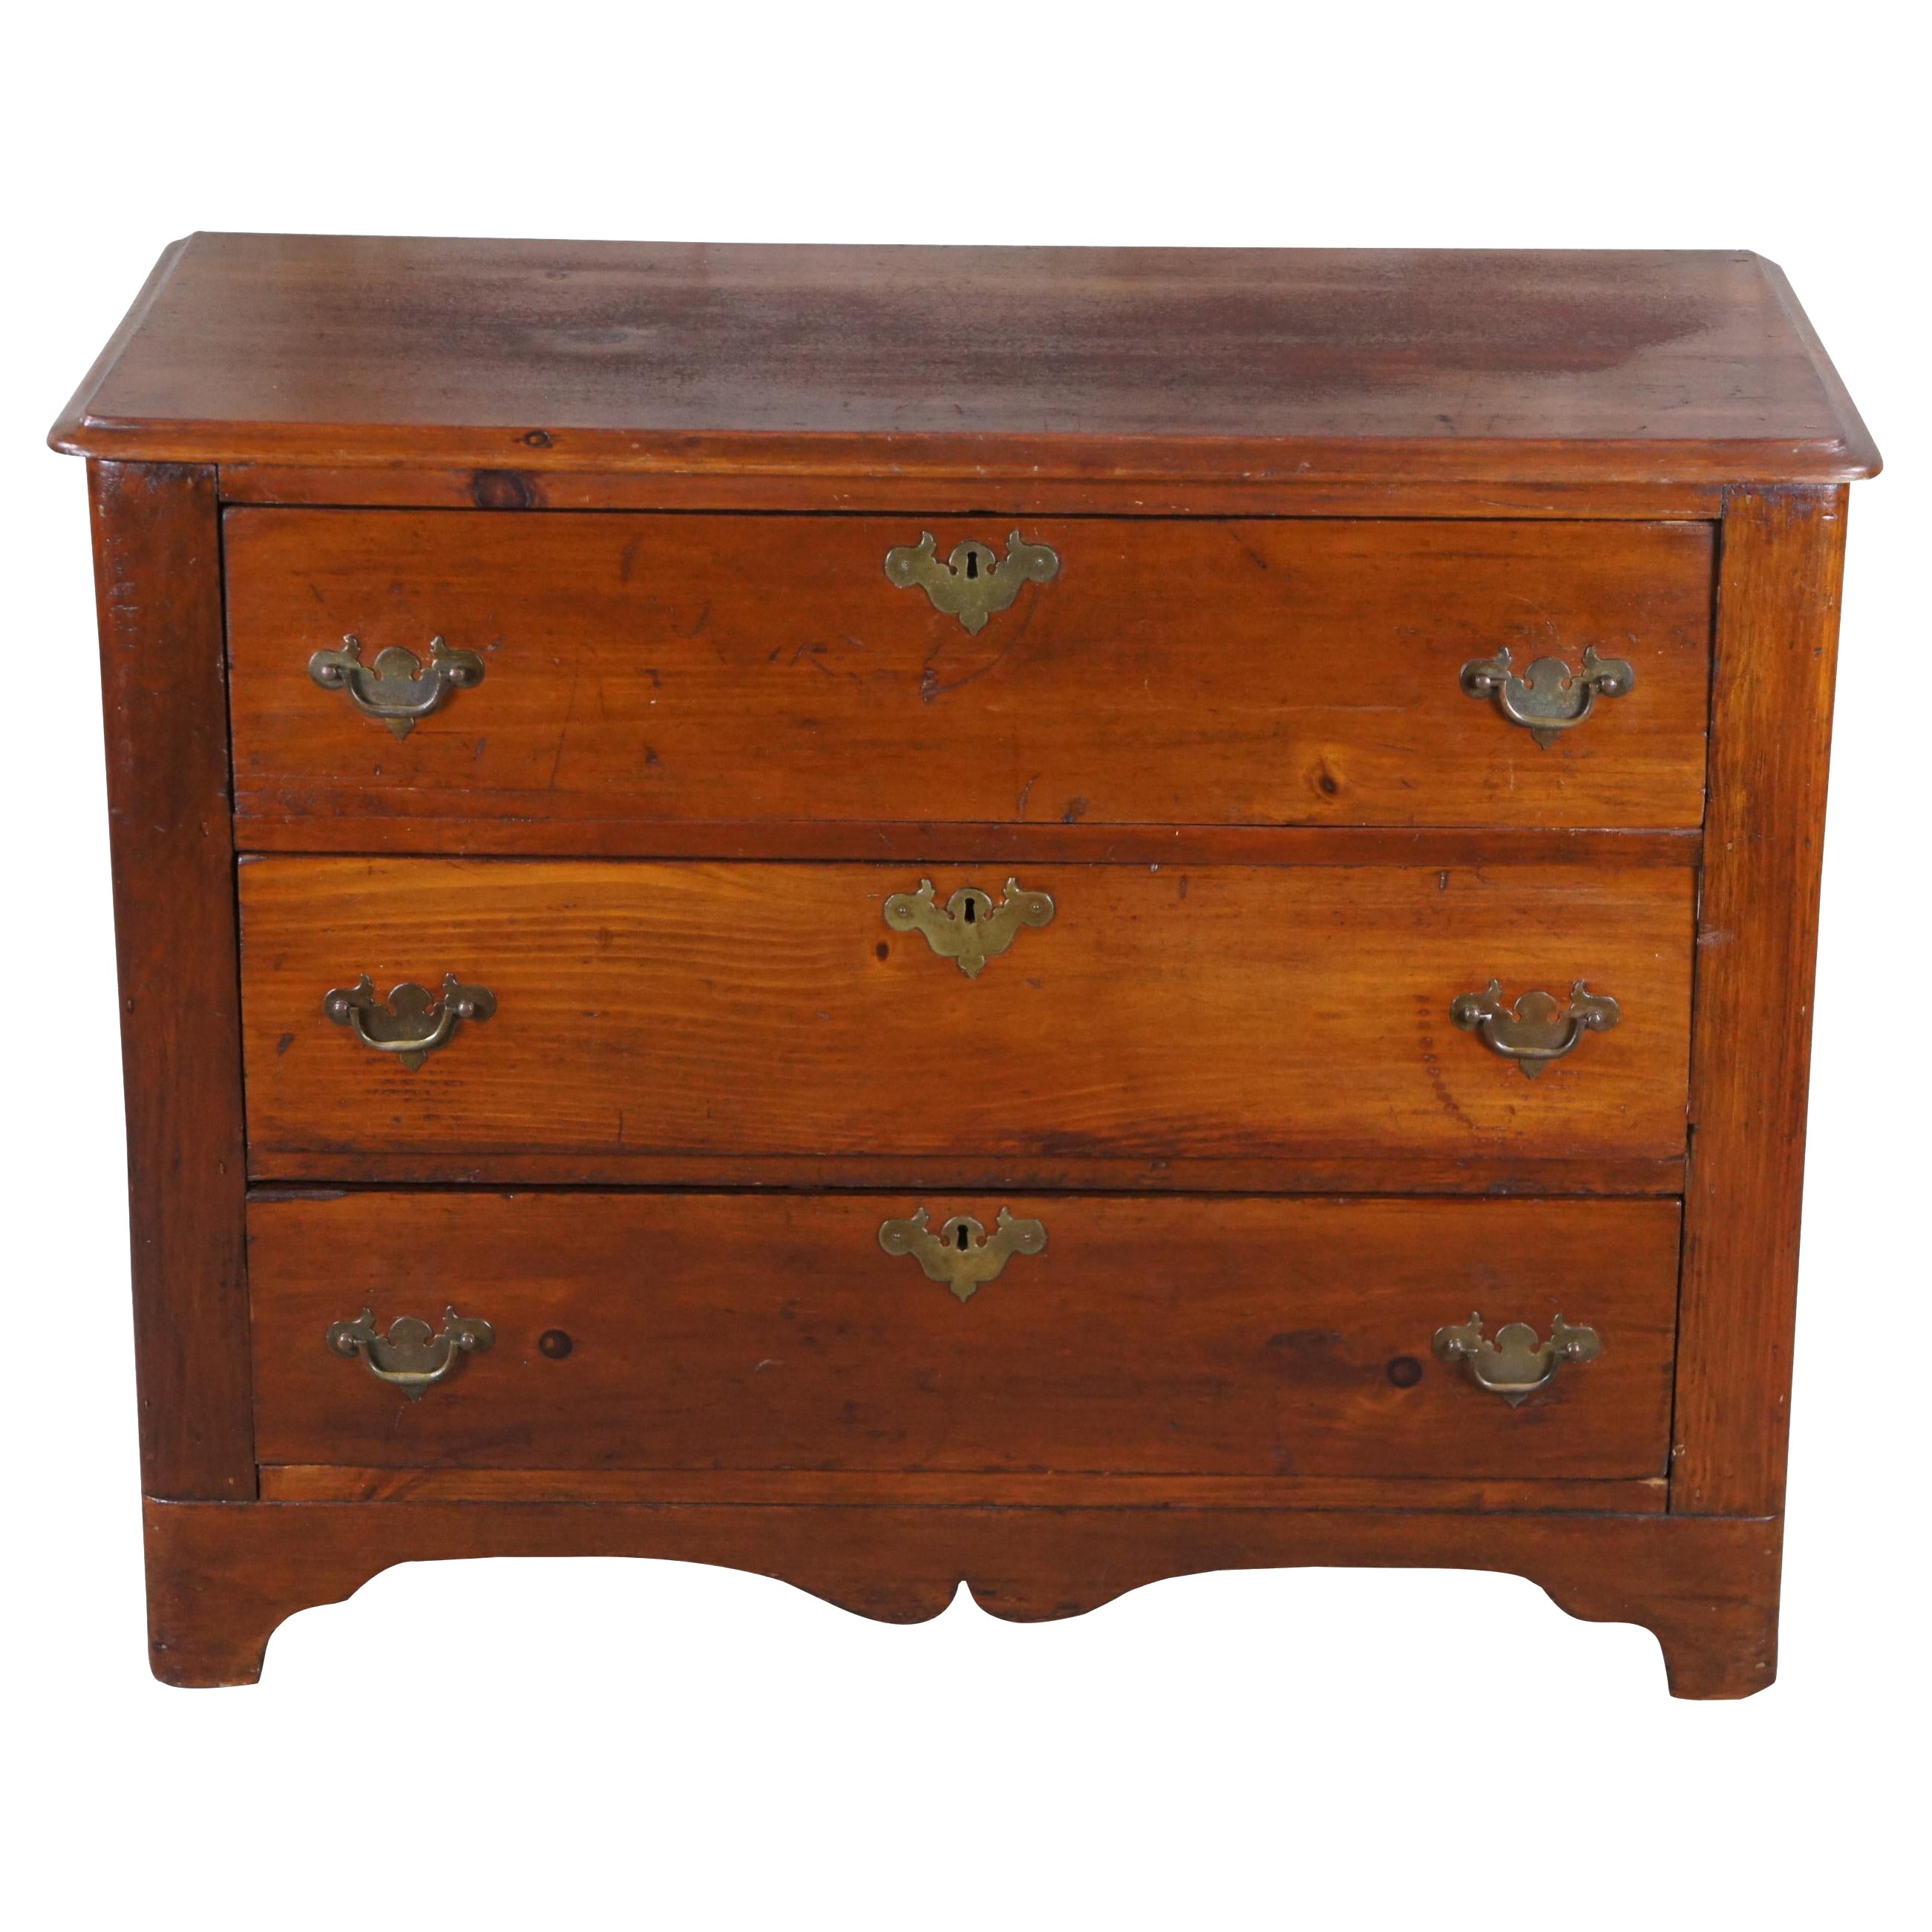 Antique Early American Colonial Pine Lowboy Chest of Drawers Dresser Console